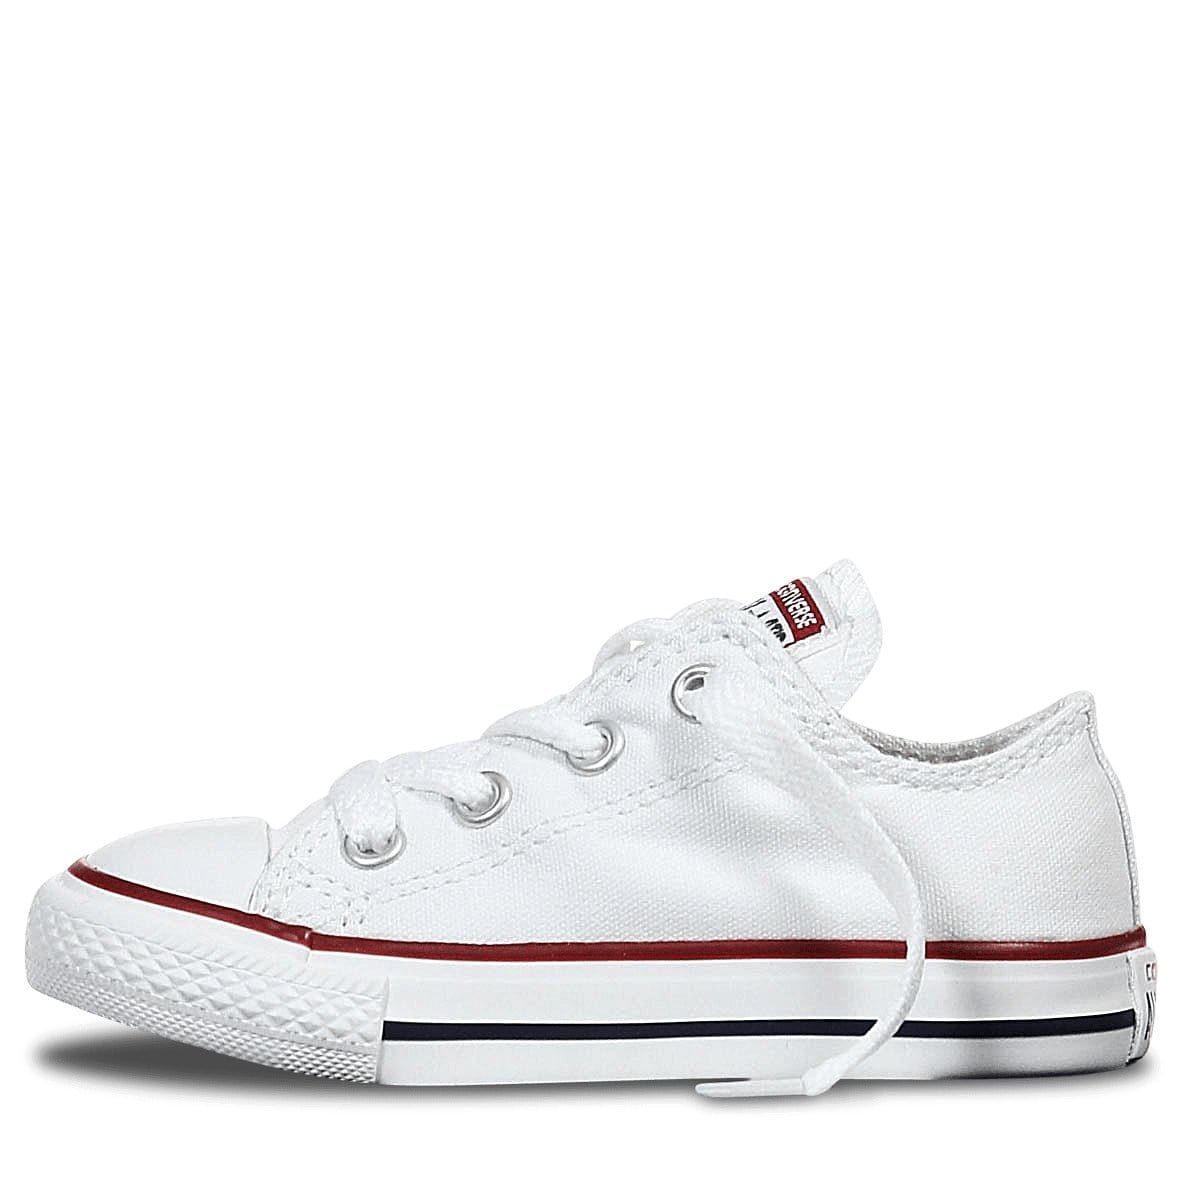 Converse CONVERSE INFANT'S CHUCK TAYLOR ALL STARS LOW TOP WHITE SHOE - INSPORT